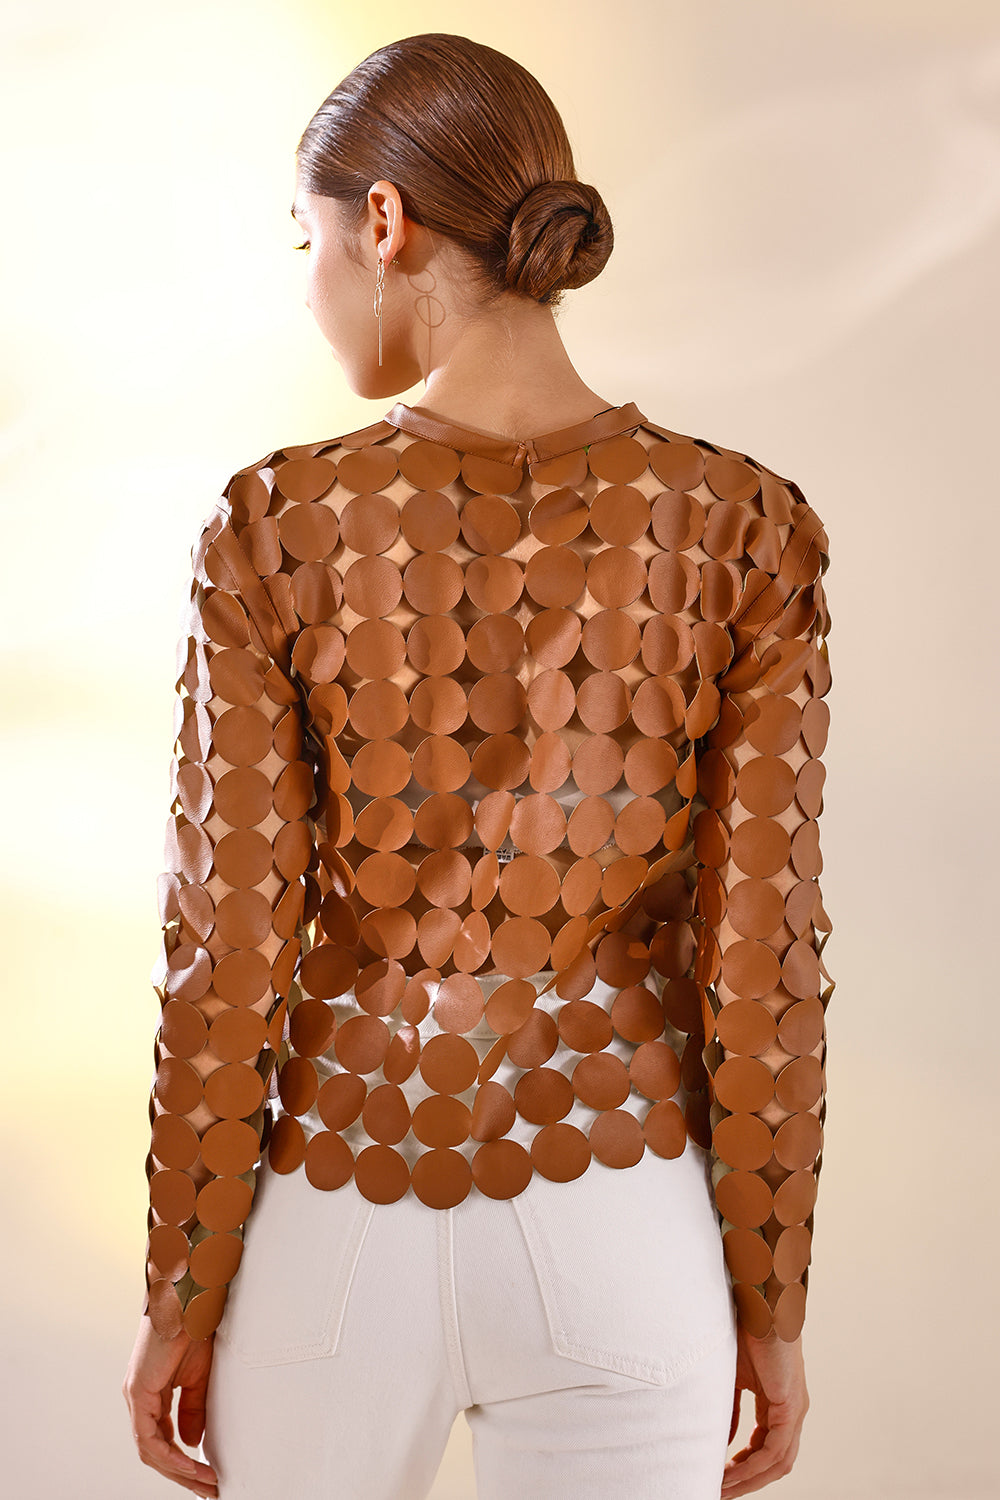 Brown glister leather top